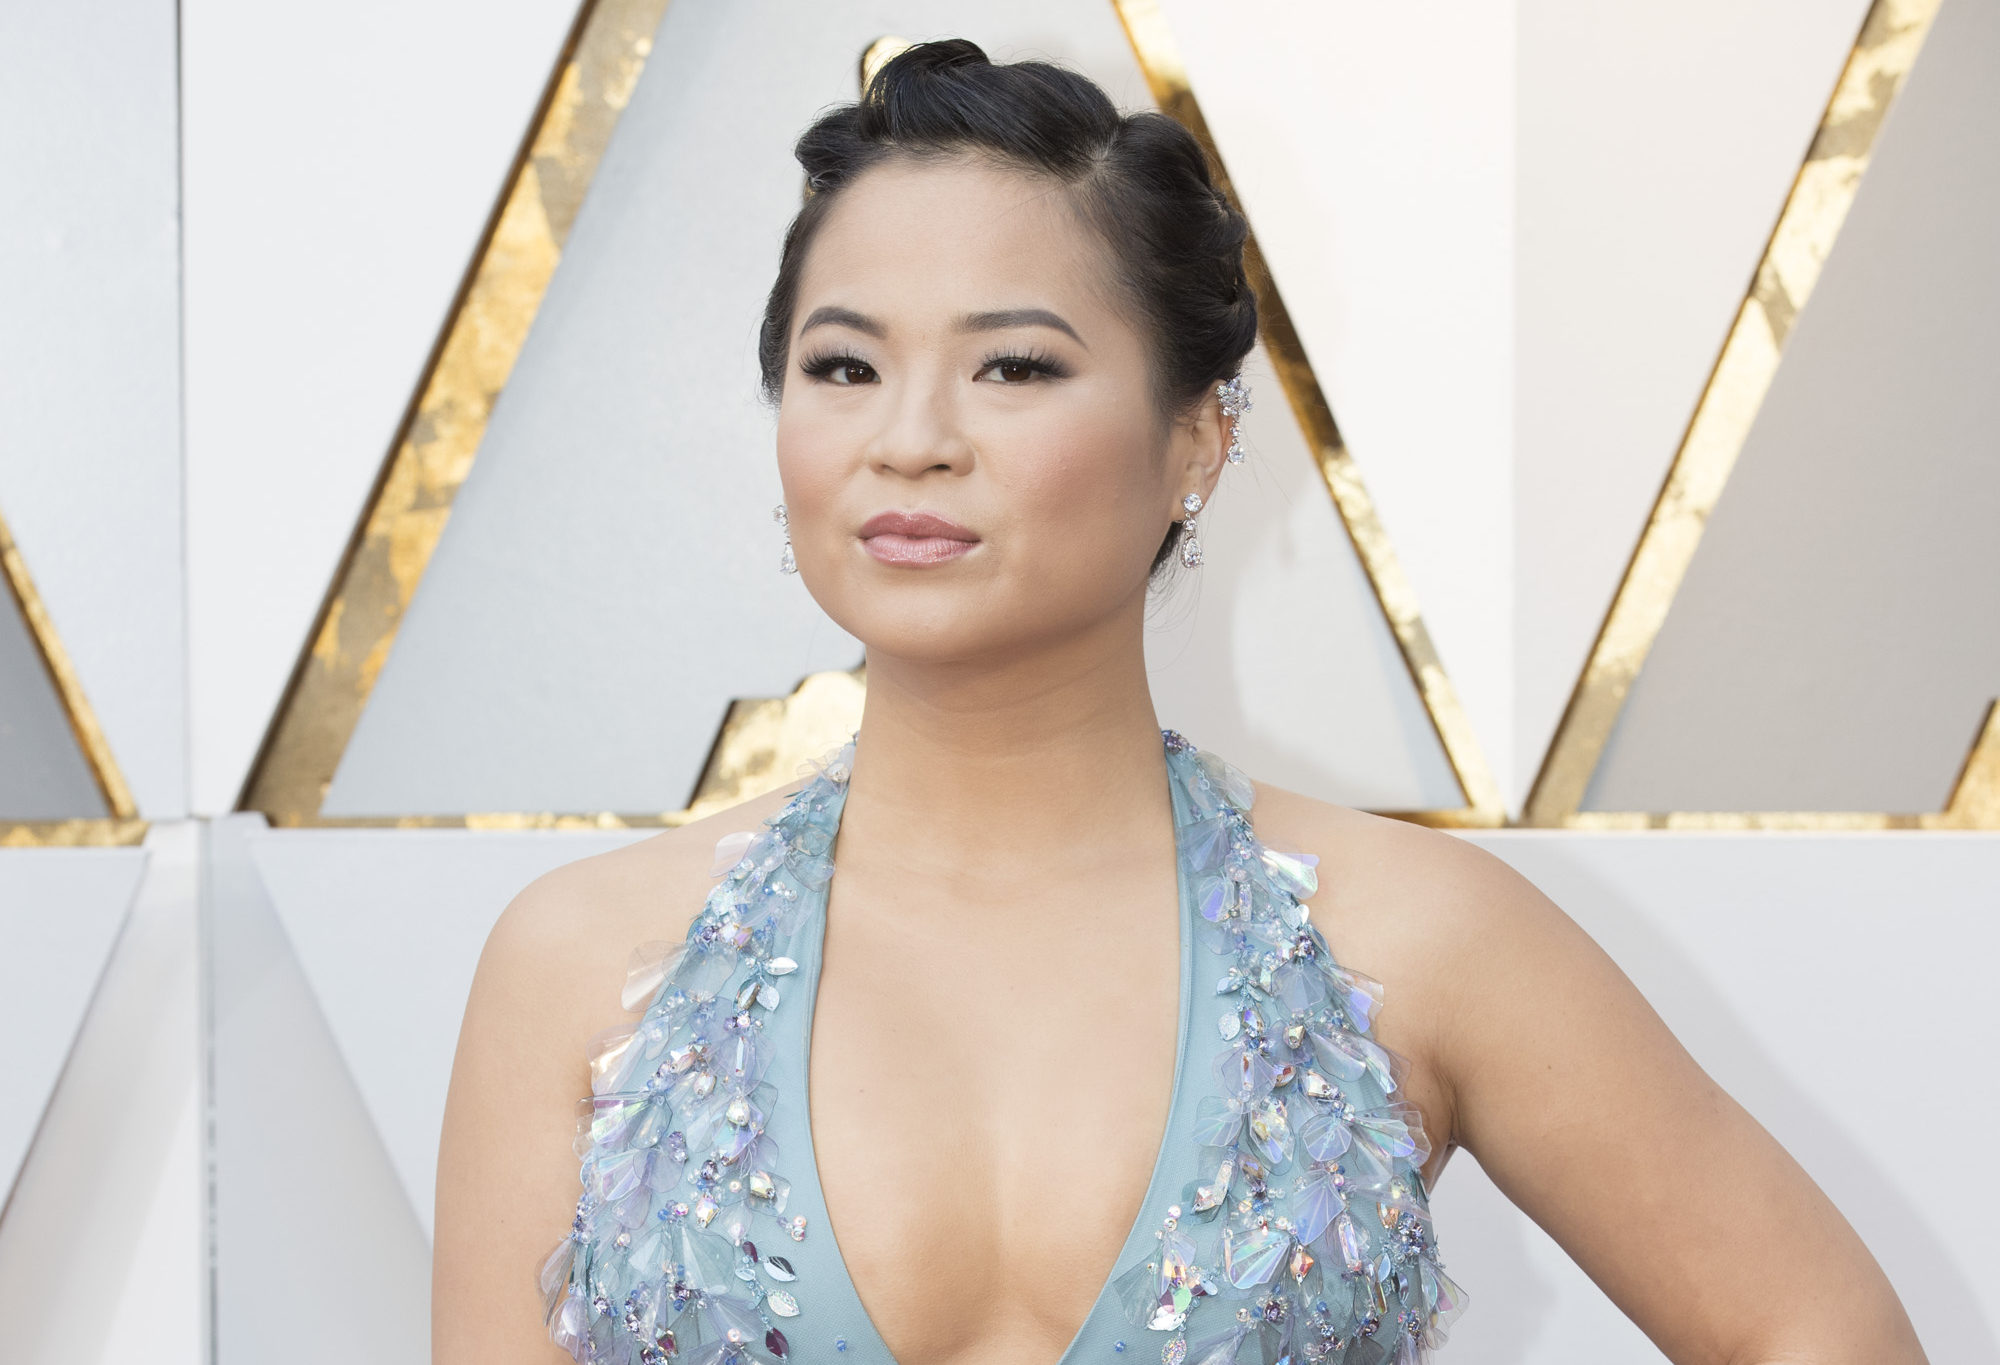 Kelly Marie Tran in a light blue gown with plunging halter neckline at the 2018 Oscars.